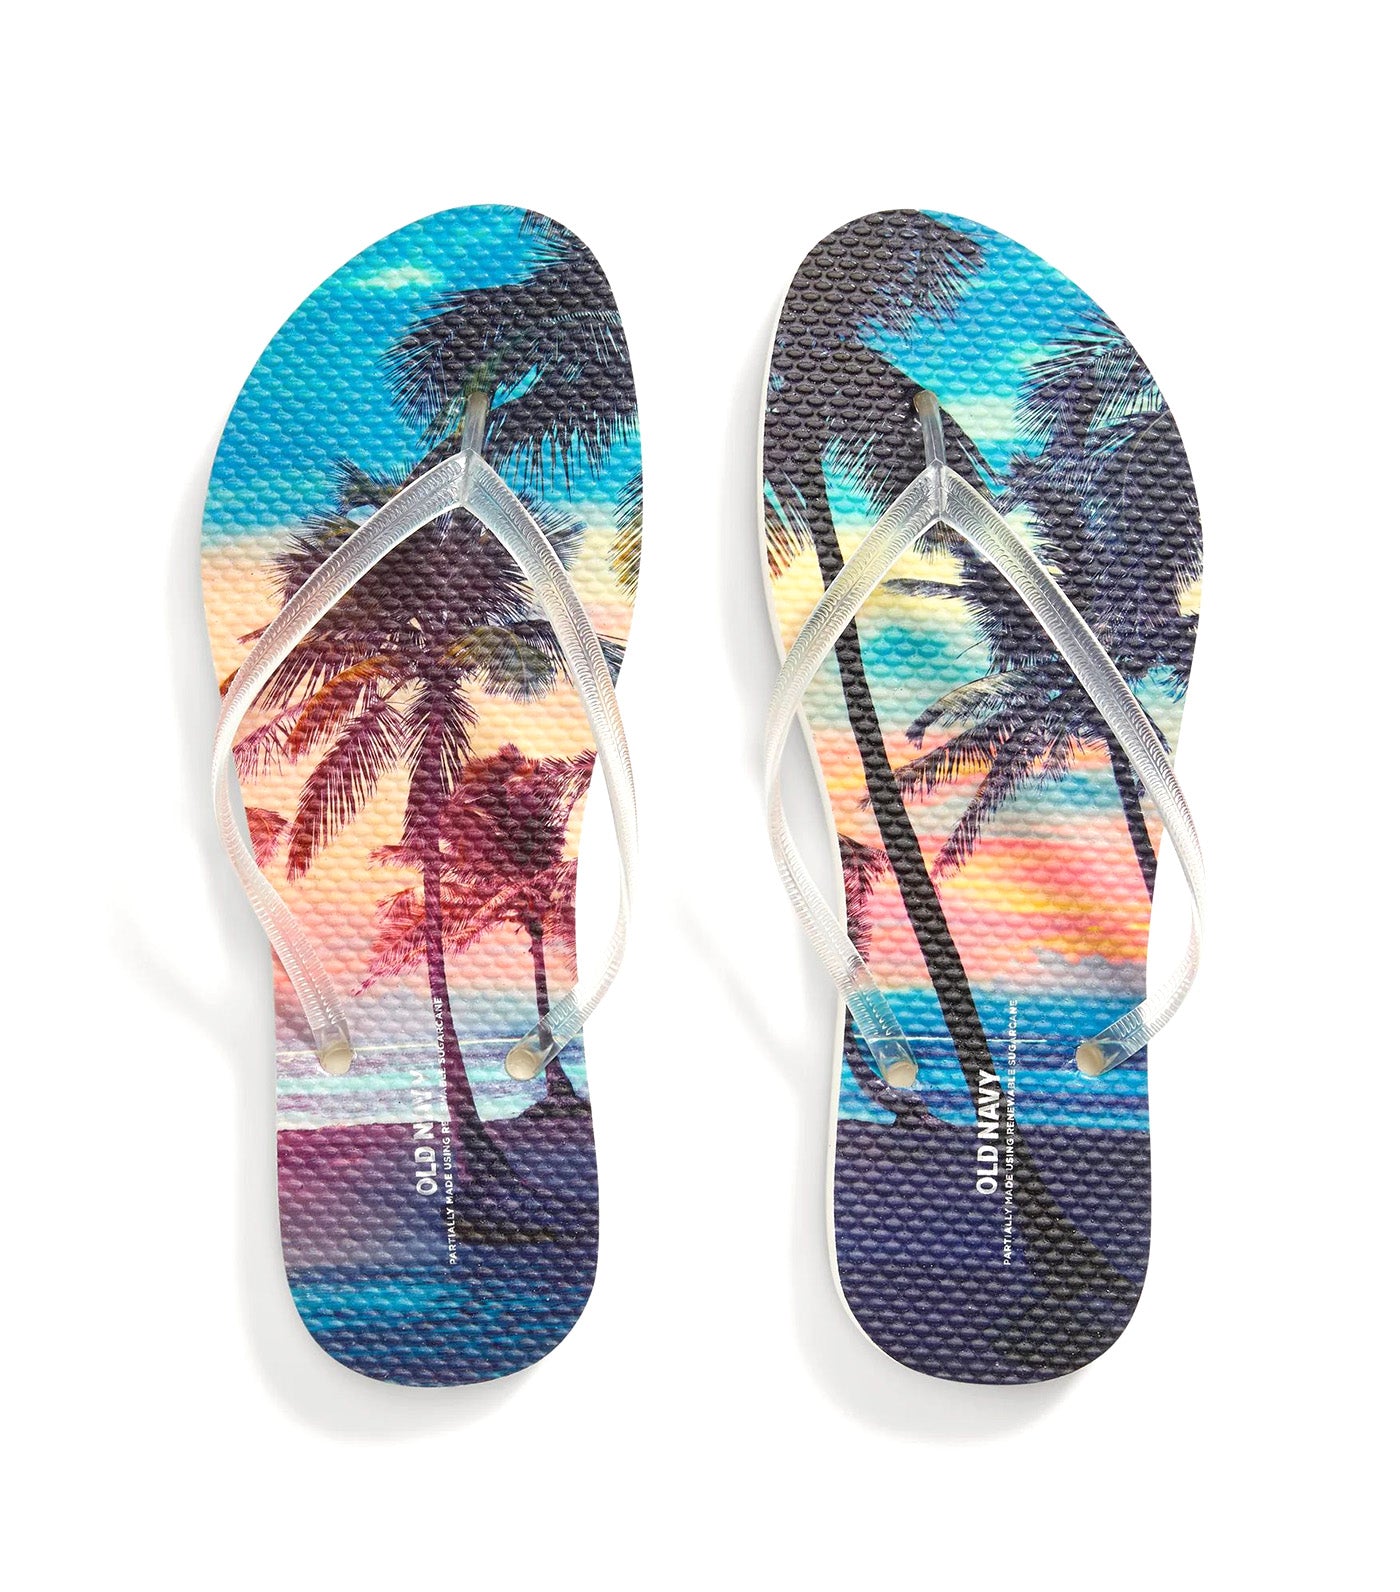 Printed Flip-Flop Sandals for Women Palm Tree